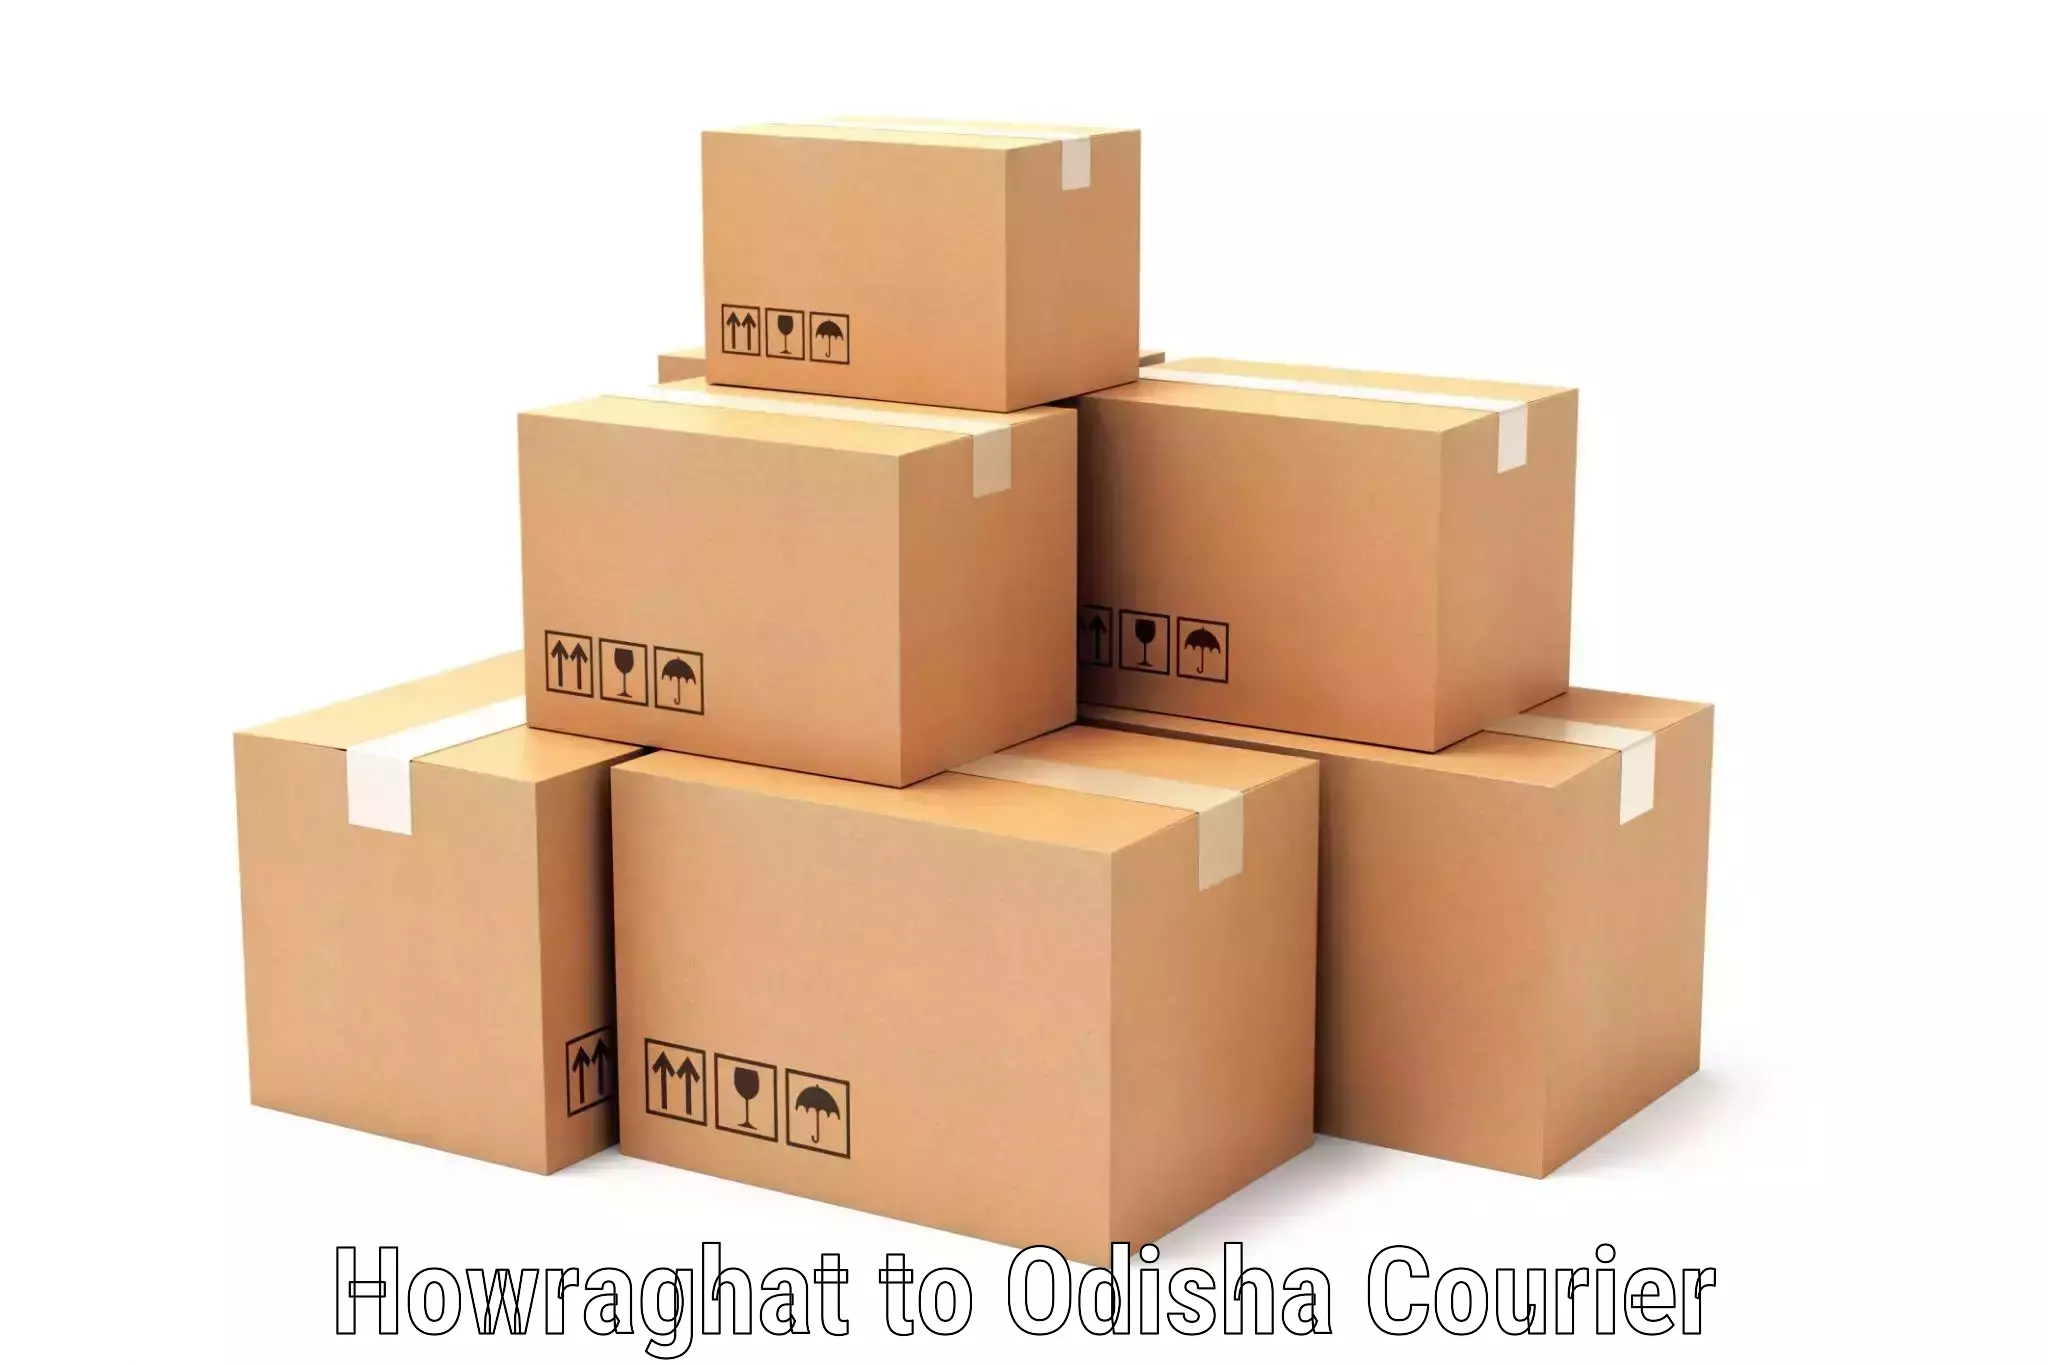 Advanced parcel tracking Howraghat to Mayurbhanj